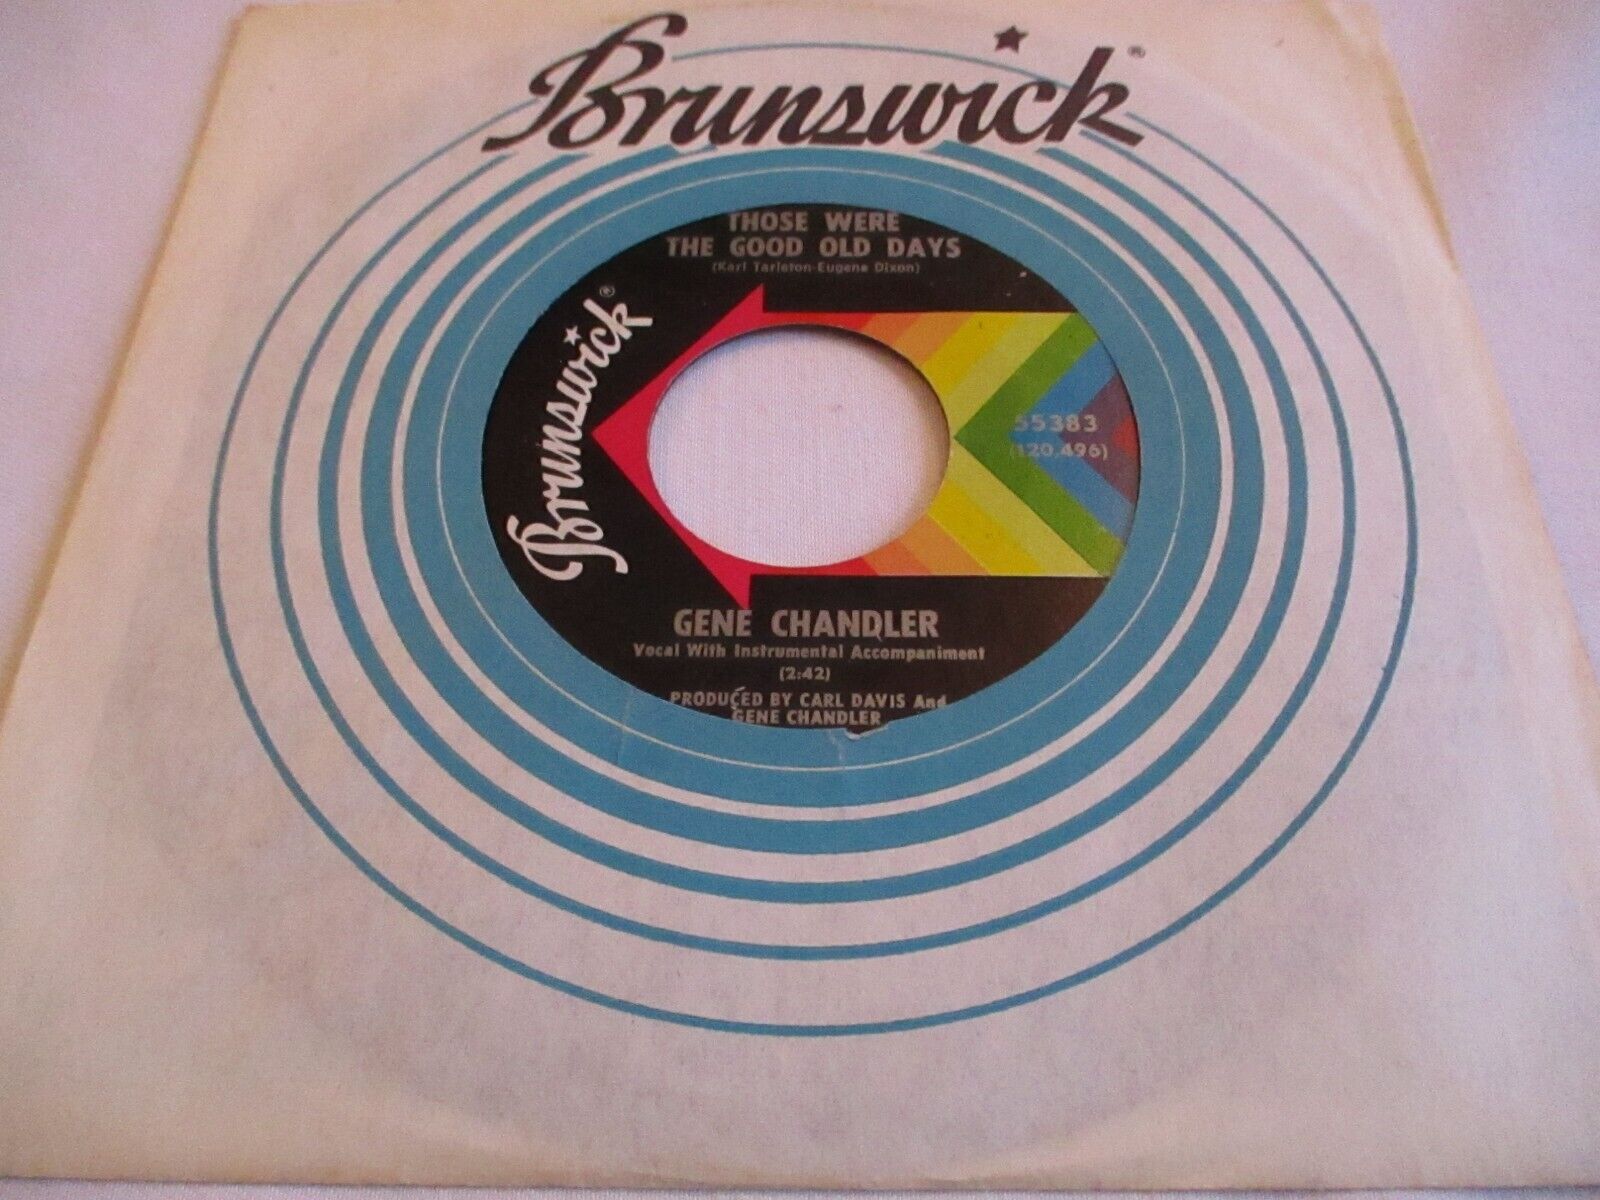 Pic 1 GENE CHANDLER - THERE WAS A TIME / THOSE WERE THE GOOD OLD DAYS - BRUNSWICK